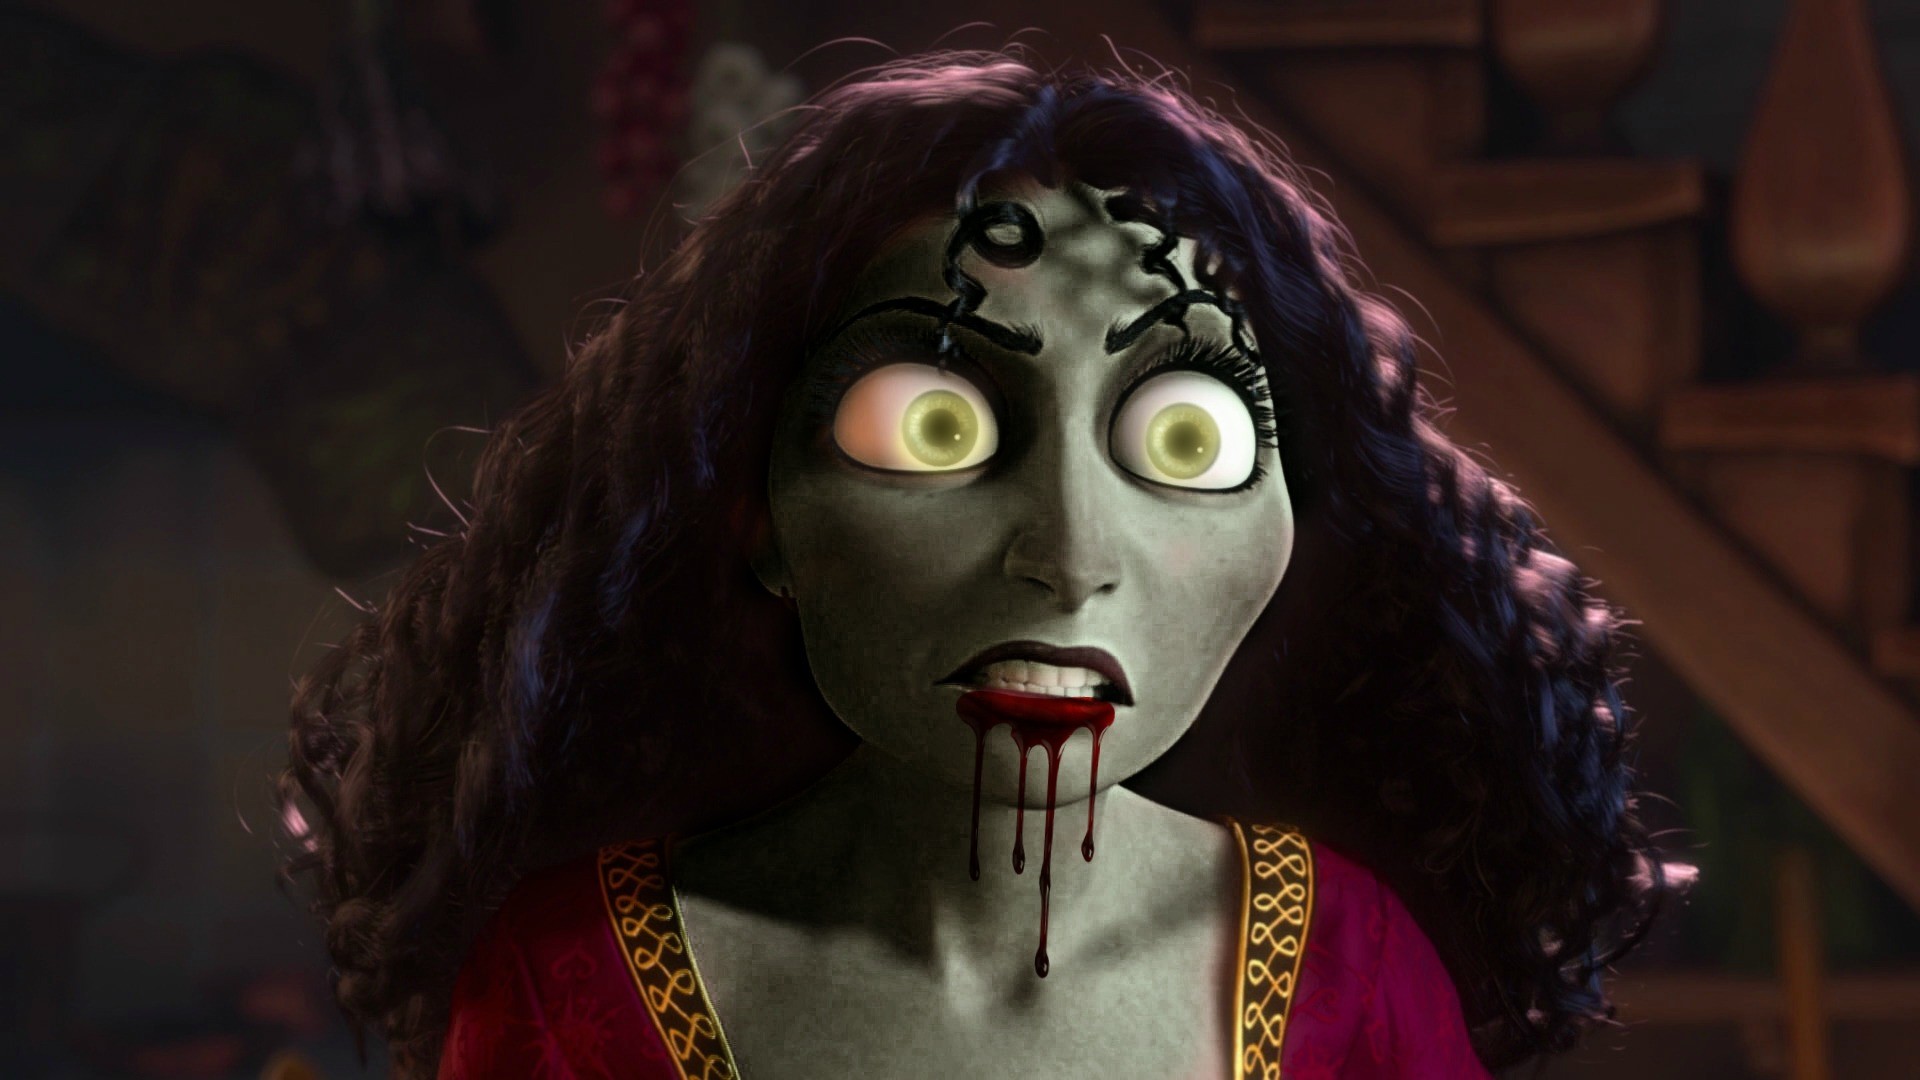 1920x1080 Tangled images Mother Gothel Zombie HD wallpaper and background photos